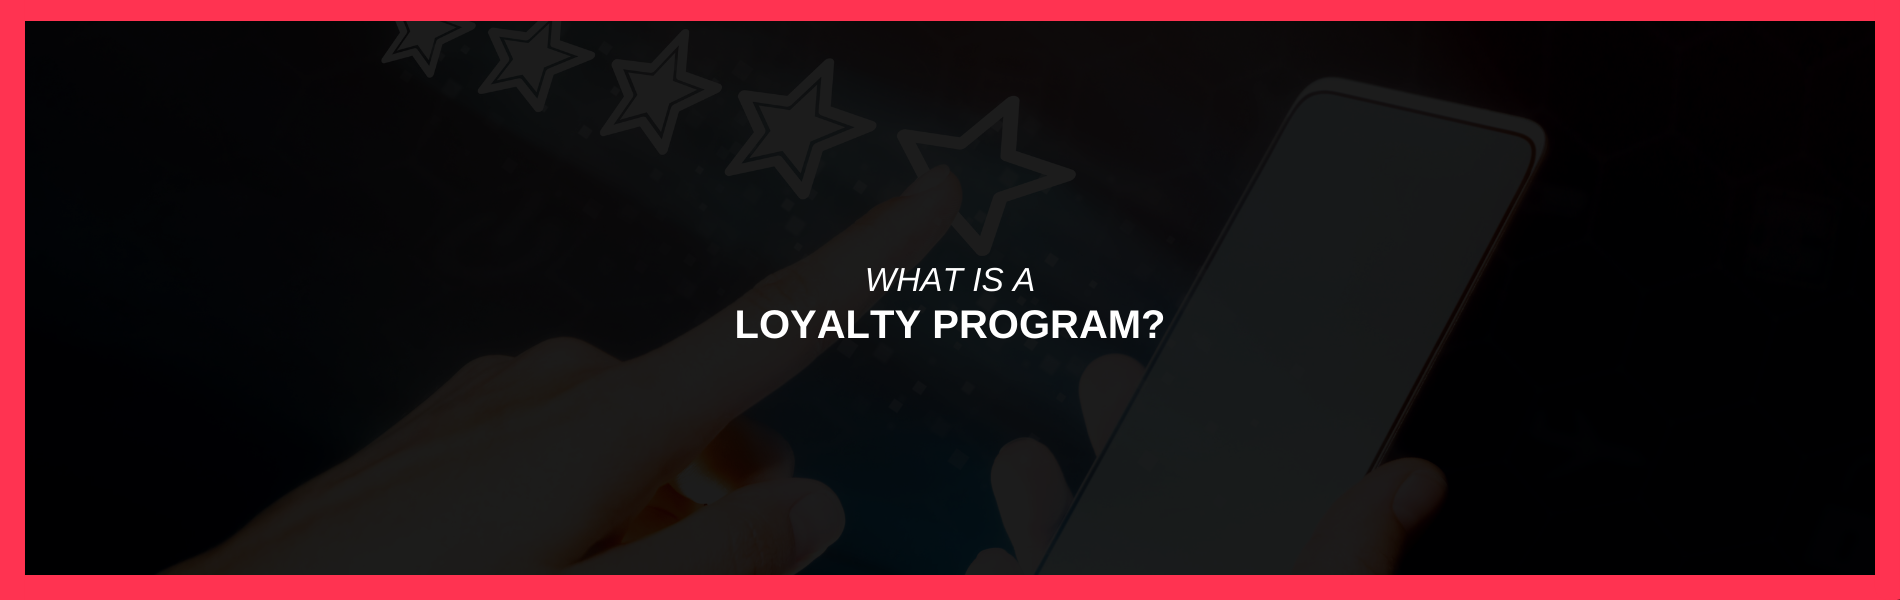 What is a Loyalty Program?